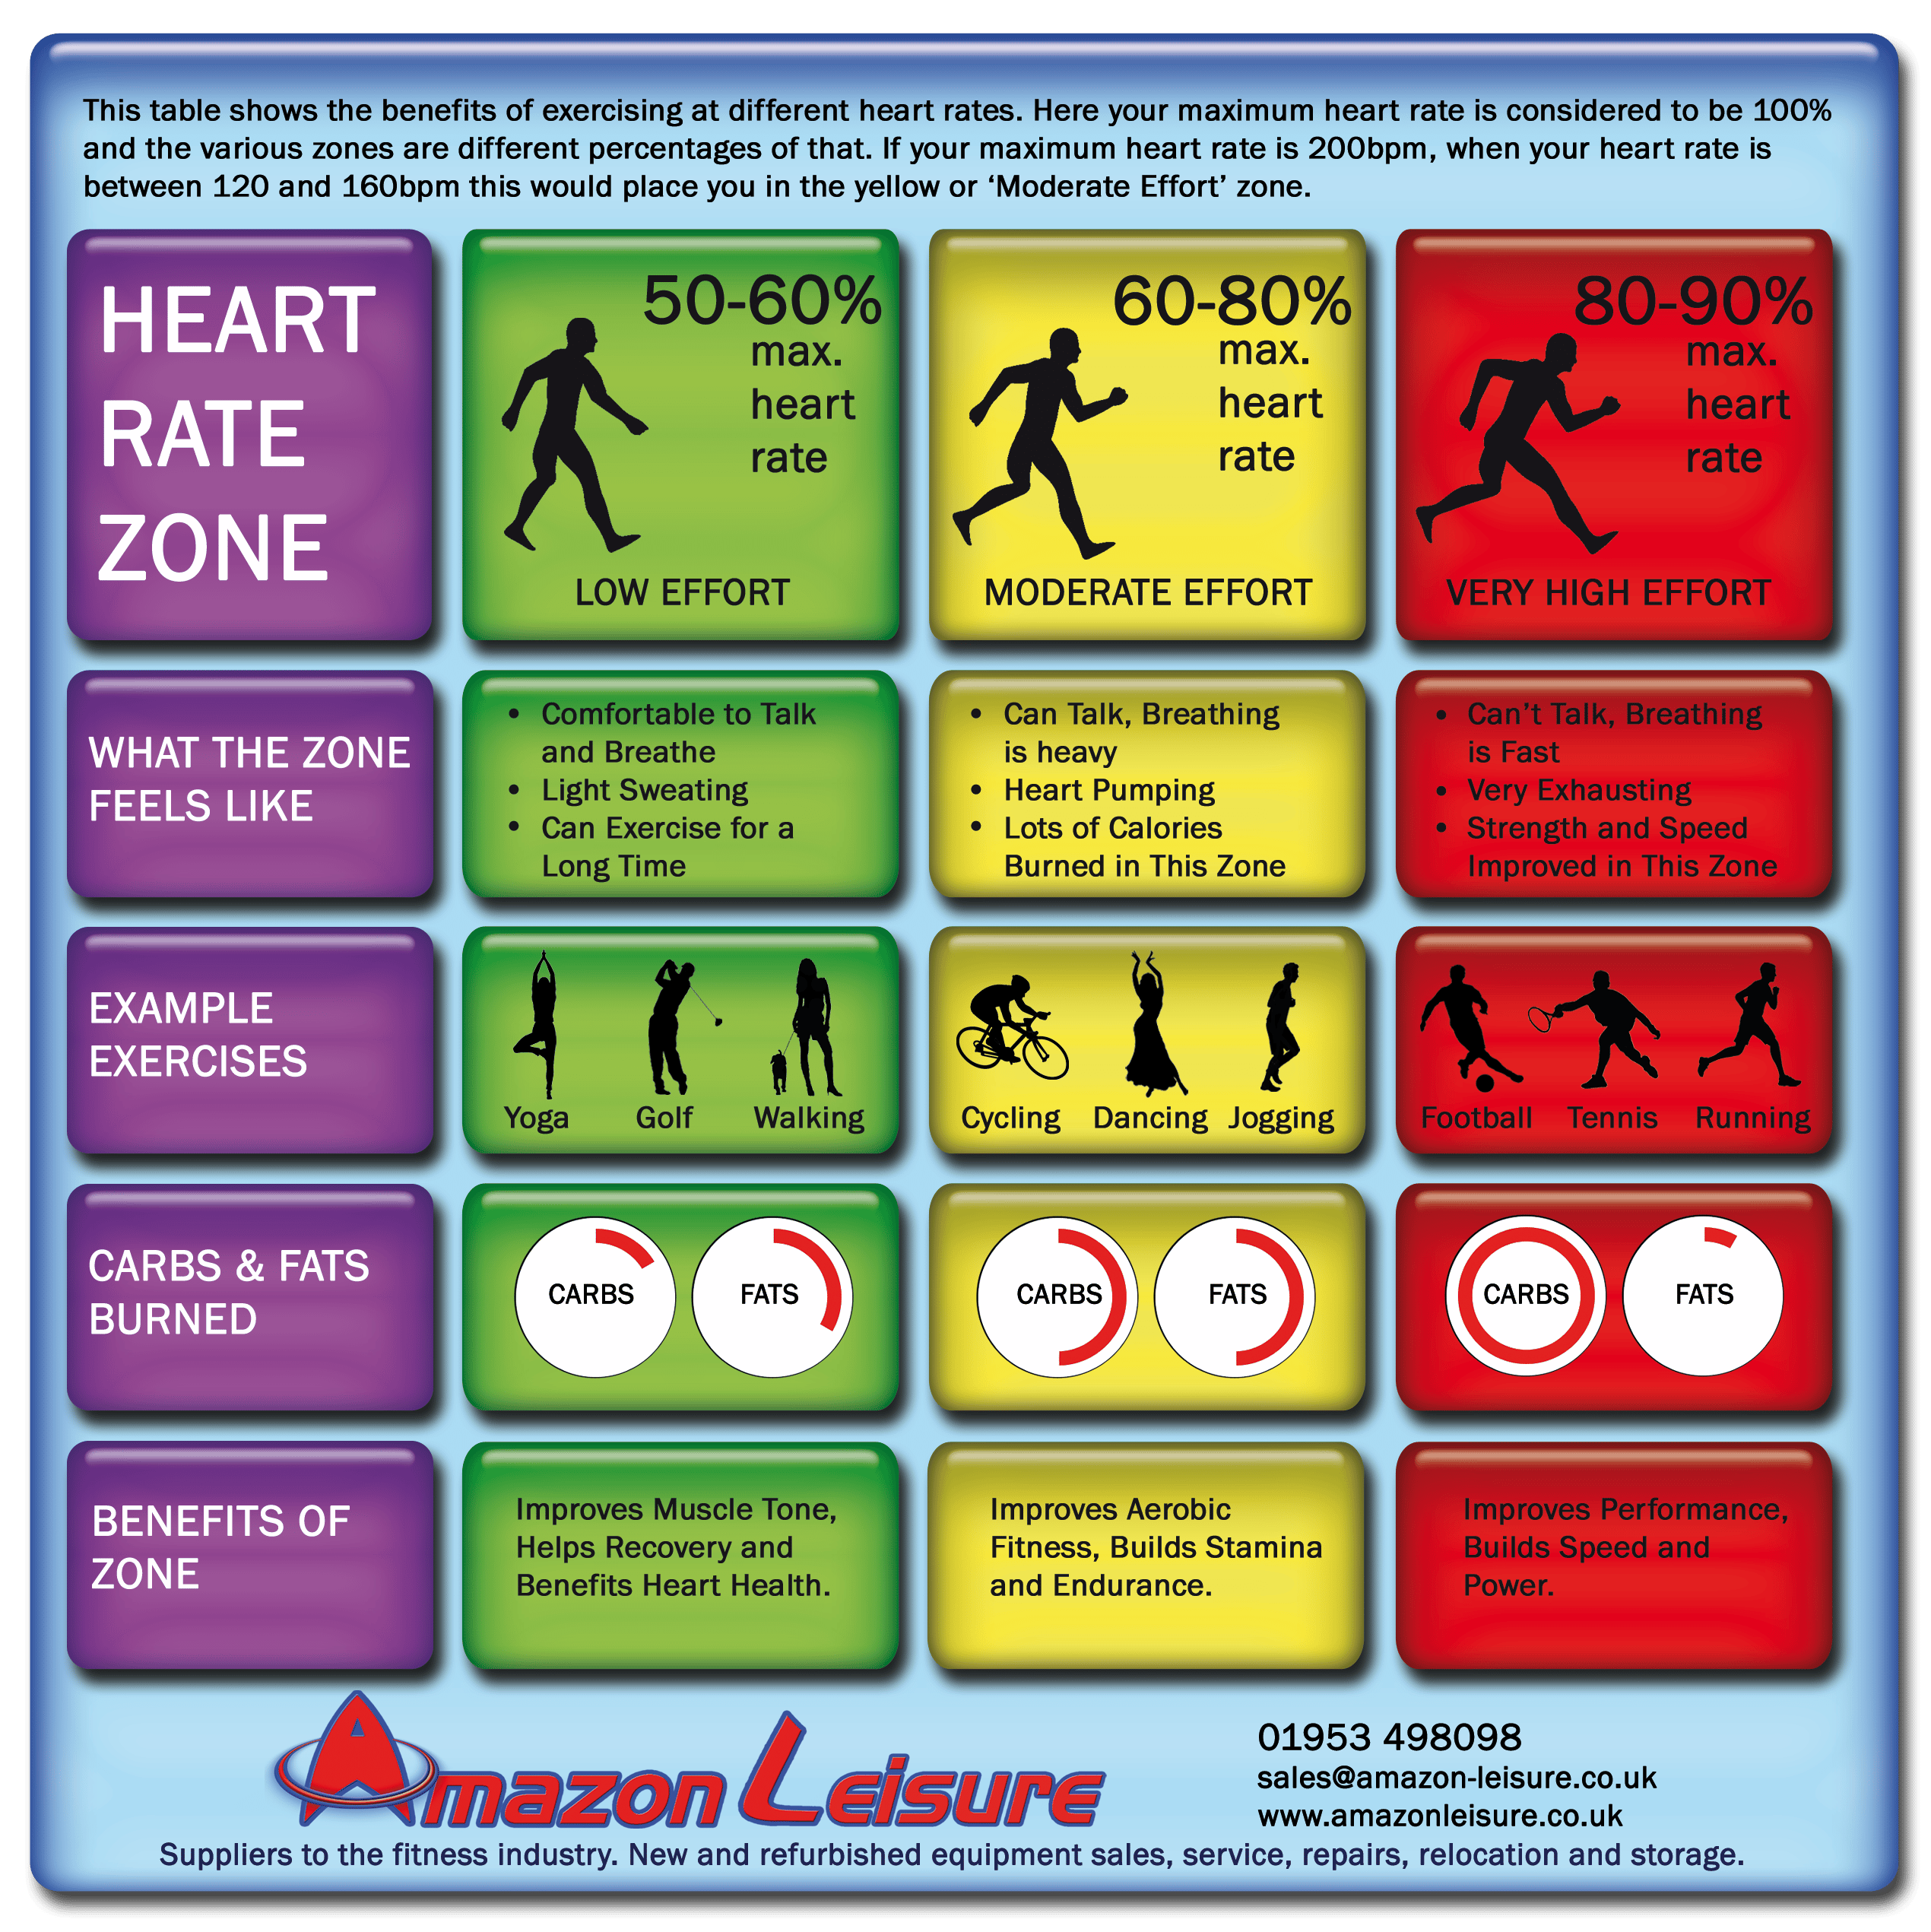 Training in your heart rate zone.